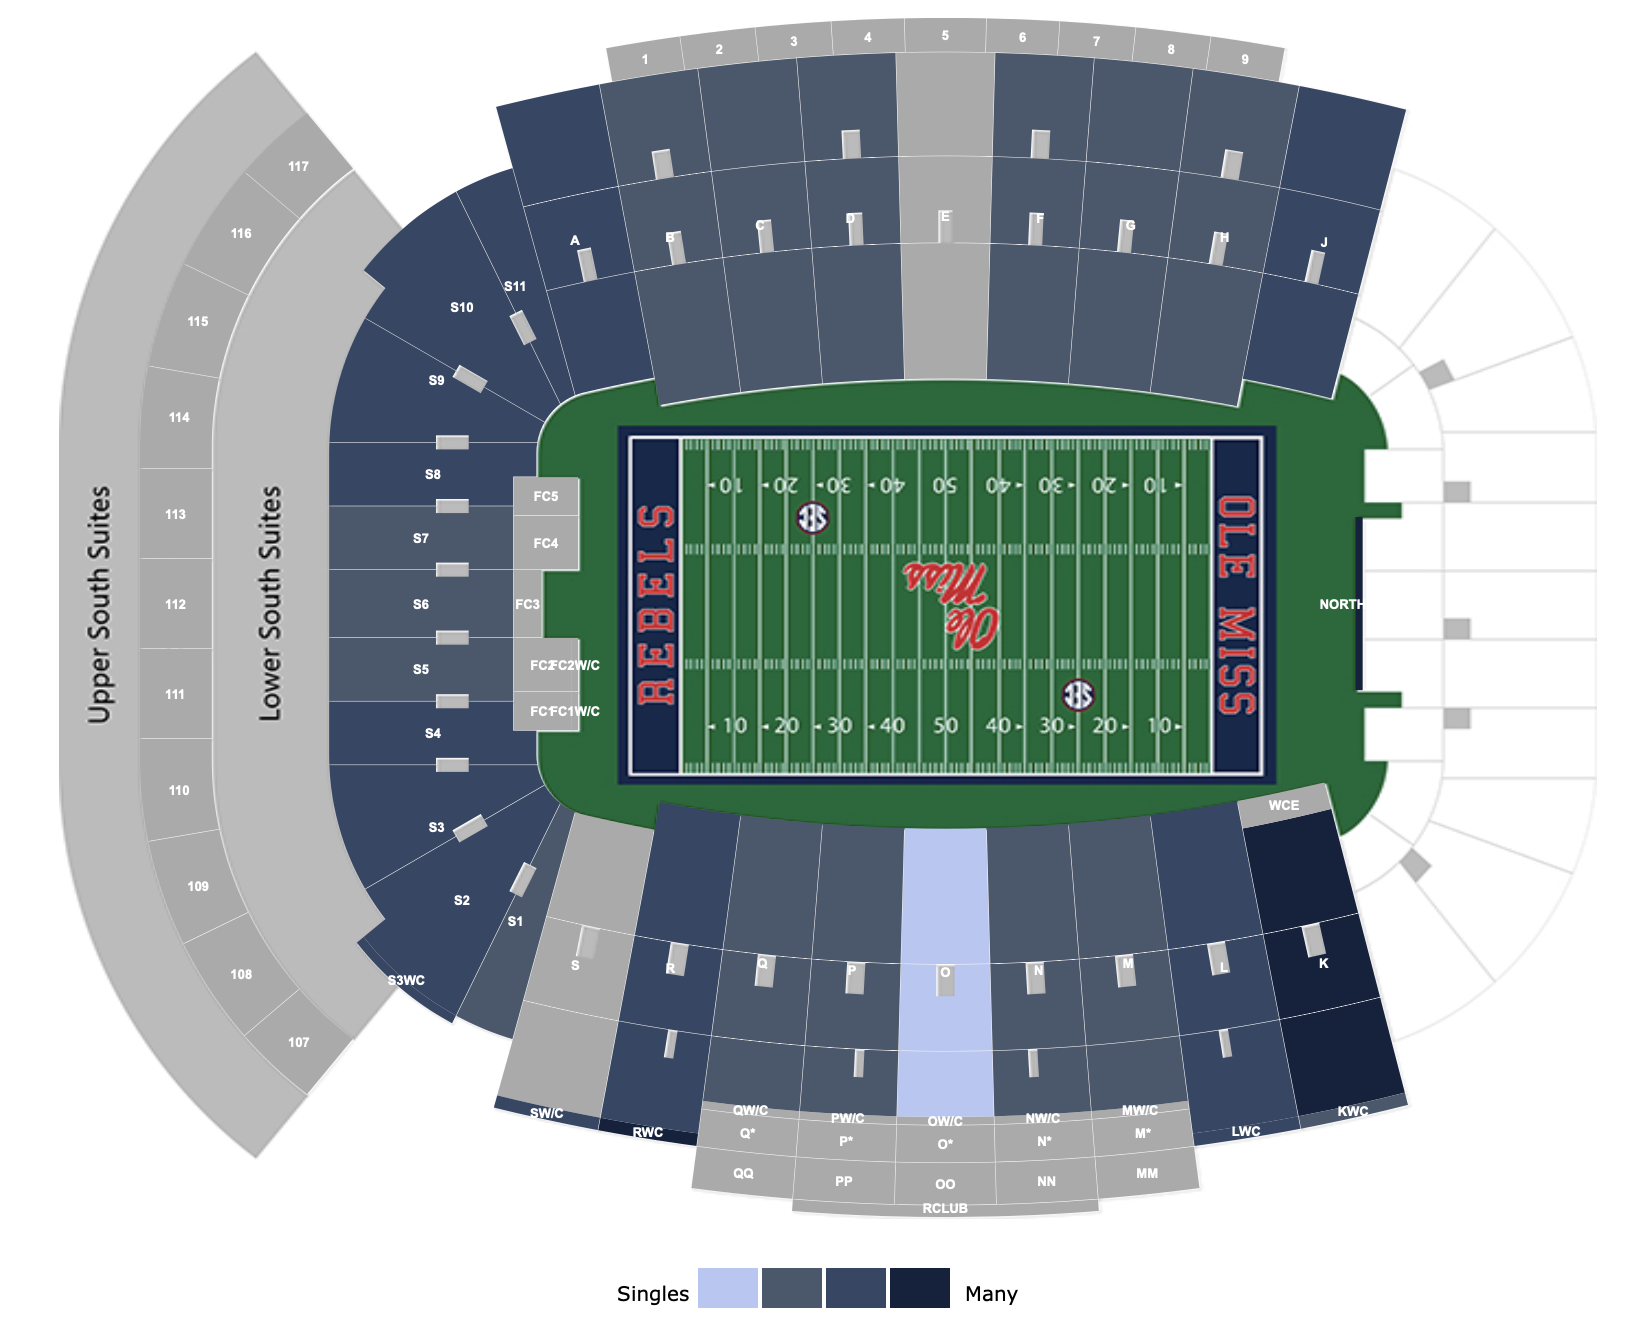 Where to find the cheapest tickets to see Mississippi vs LSU on 11/16/19